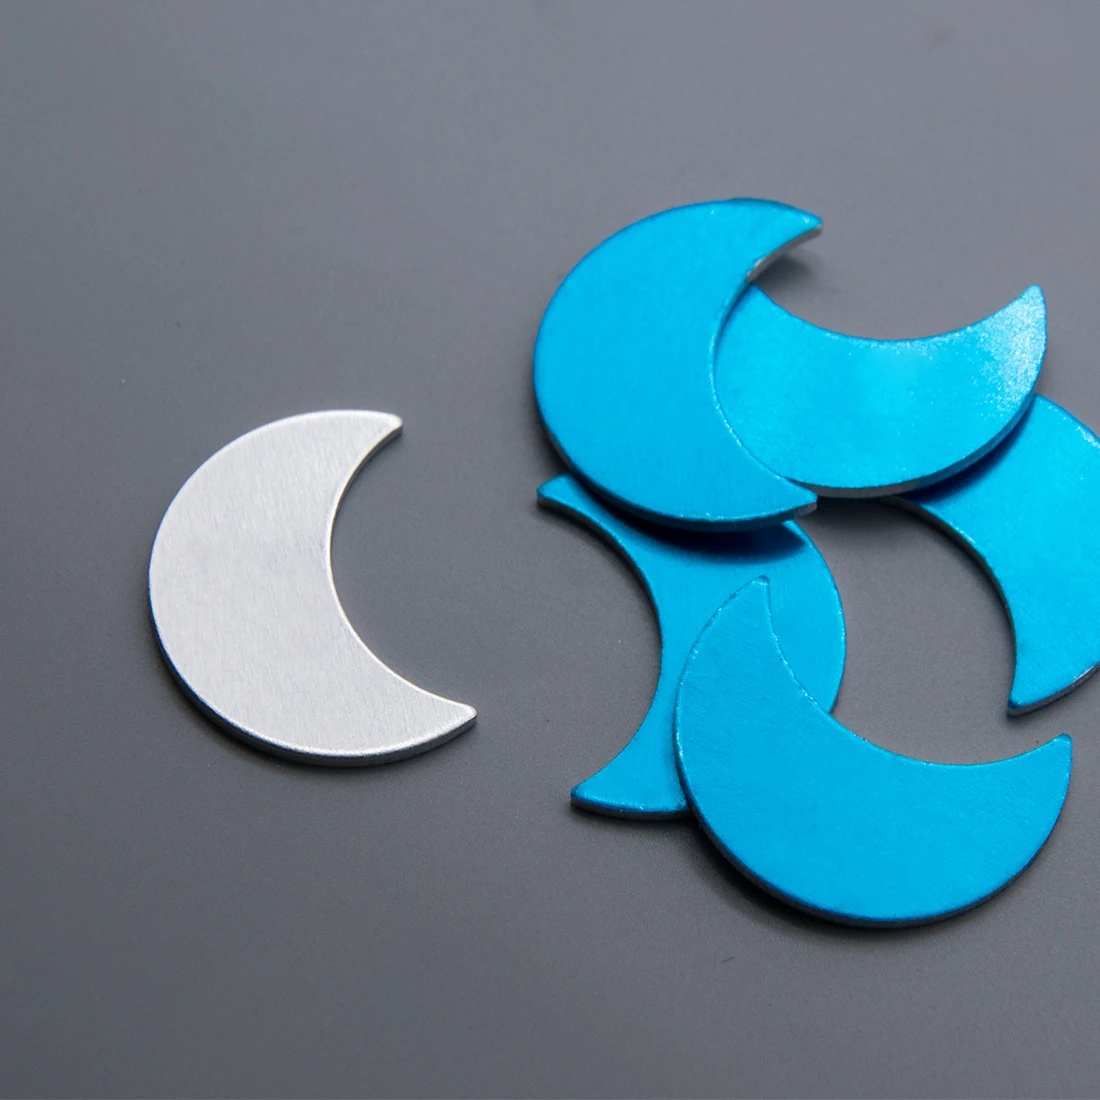 Crescent Moon Aluminum Blanks for Metal Stamping and Engraving Jewelry Making Pendant Pet ID Tags